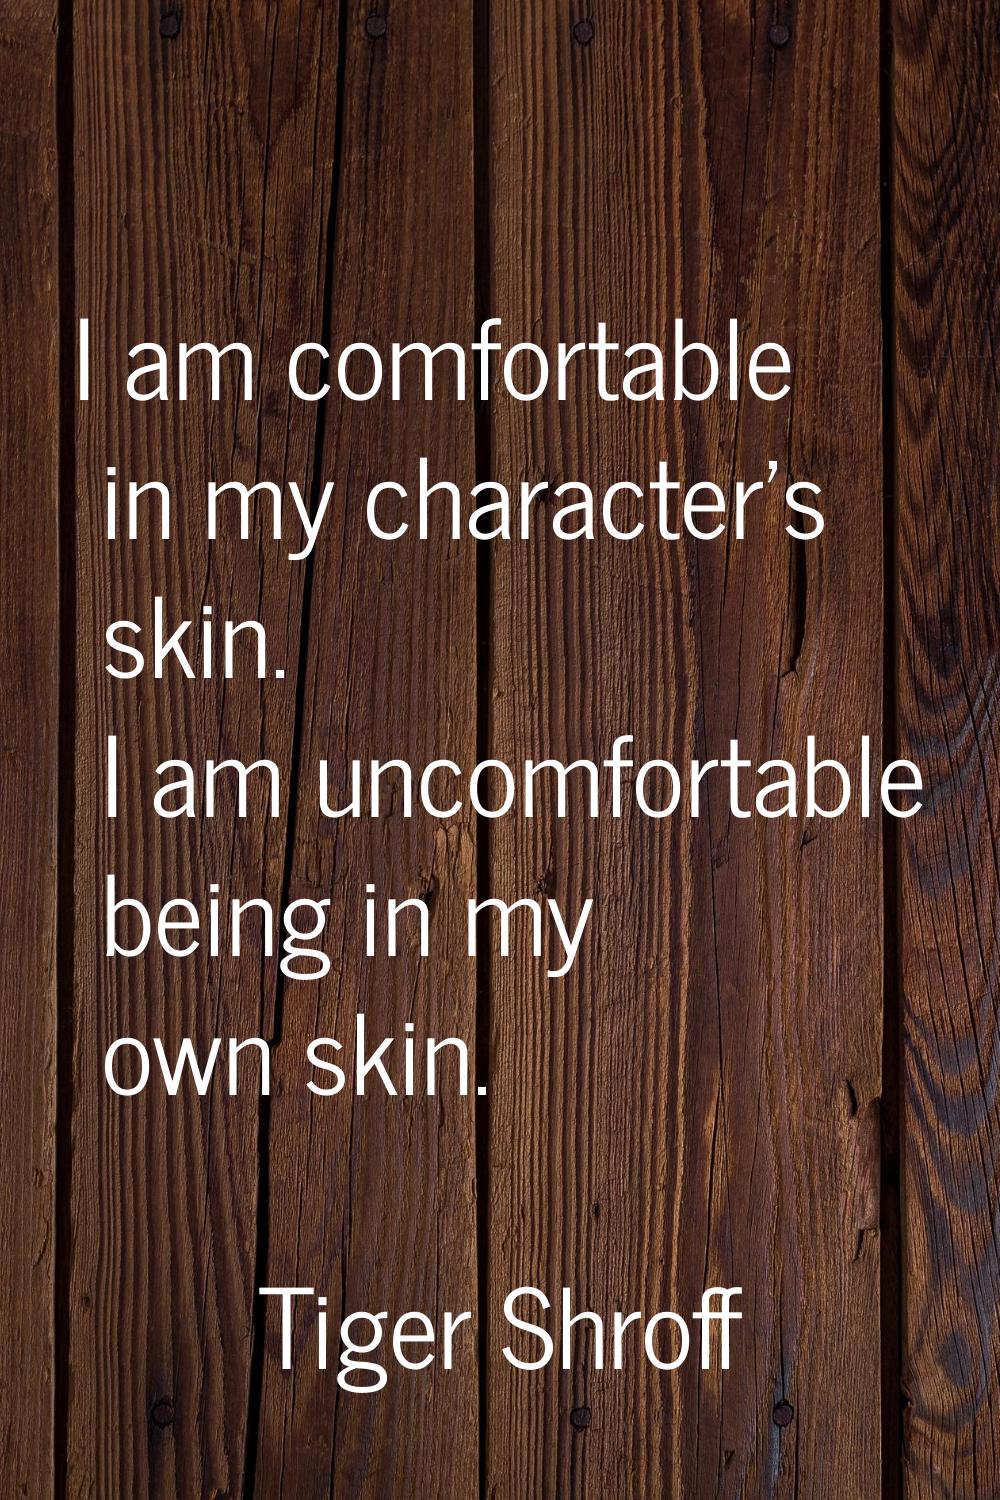 I am comfortable in my character's skin. I am uncomfortable being in my own skin.